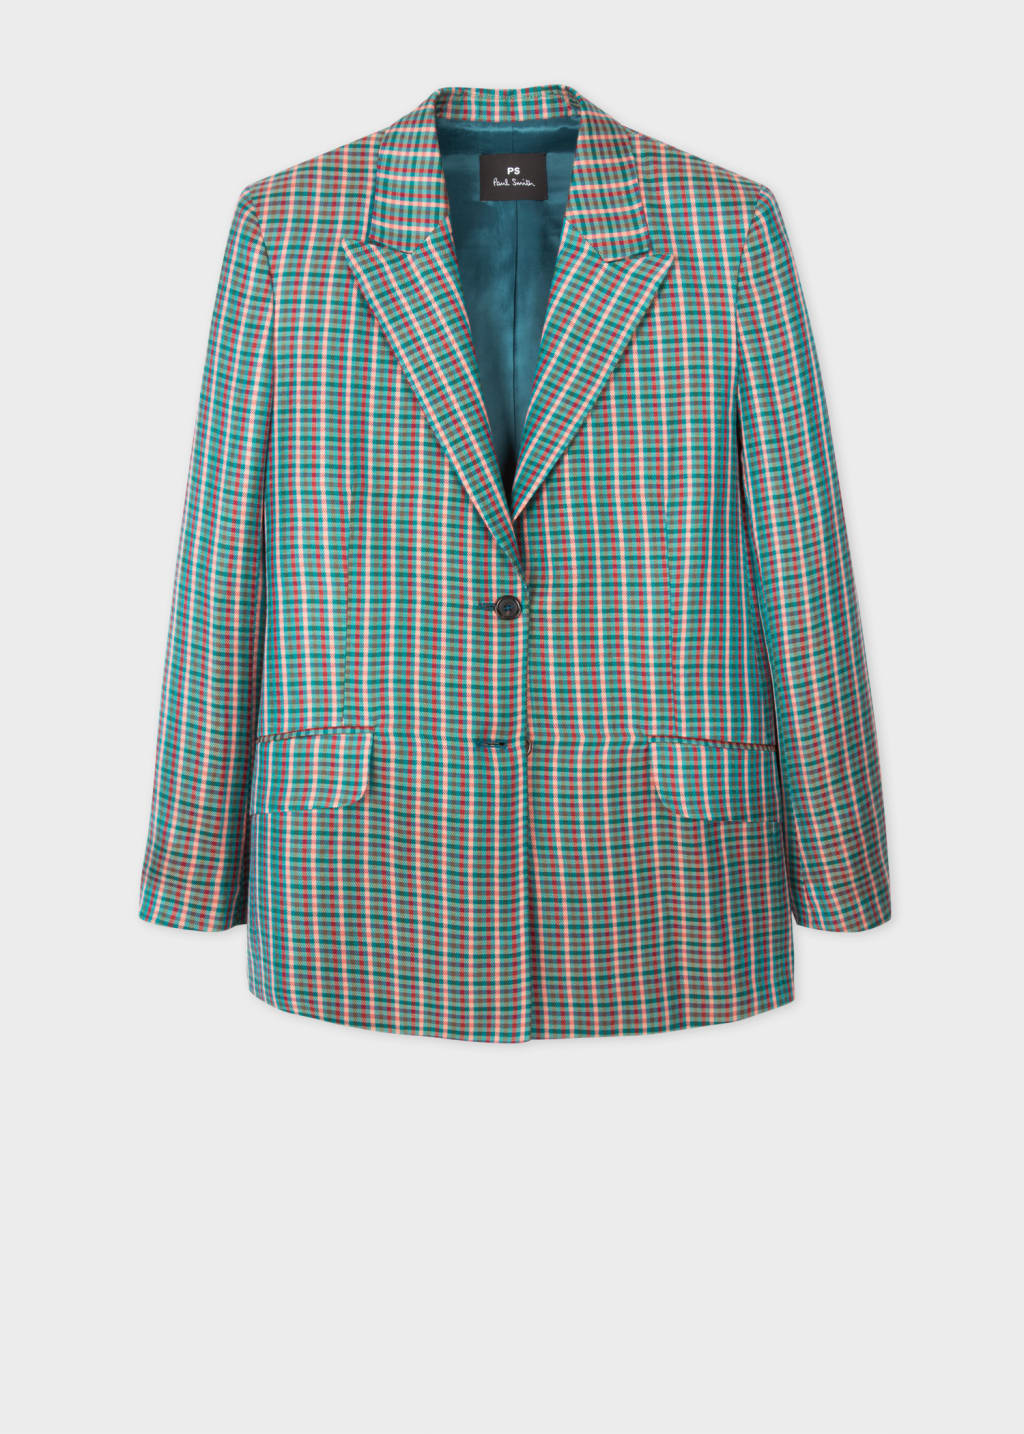 Women's Teal and Pink Gingham Blazer